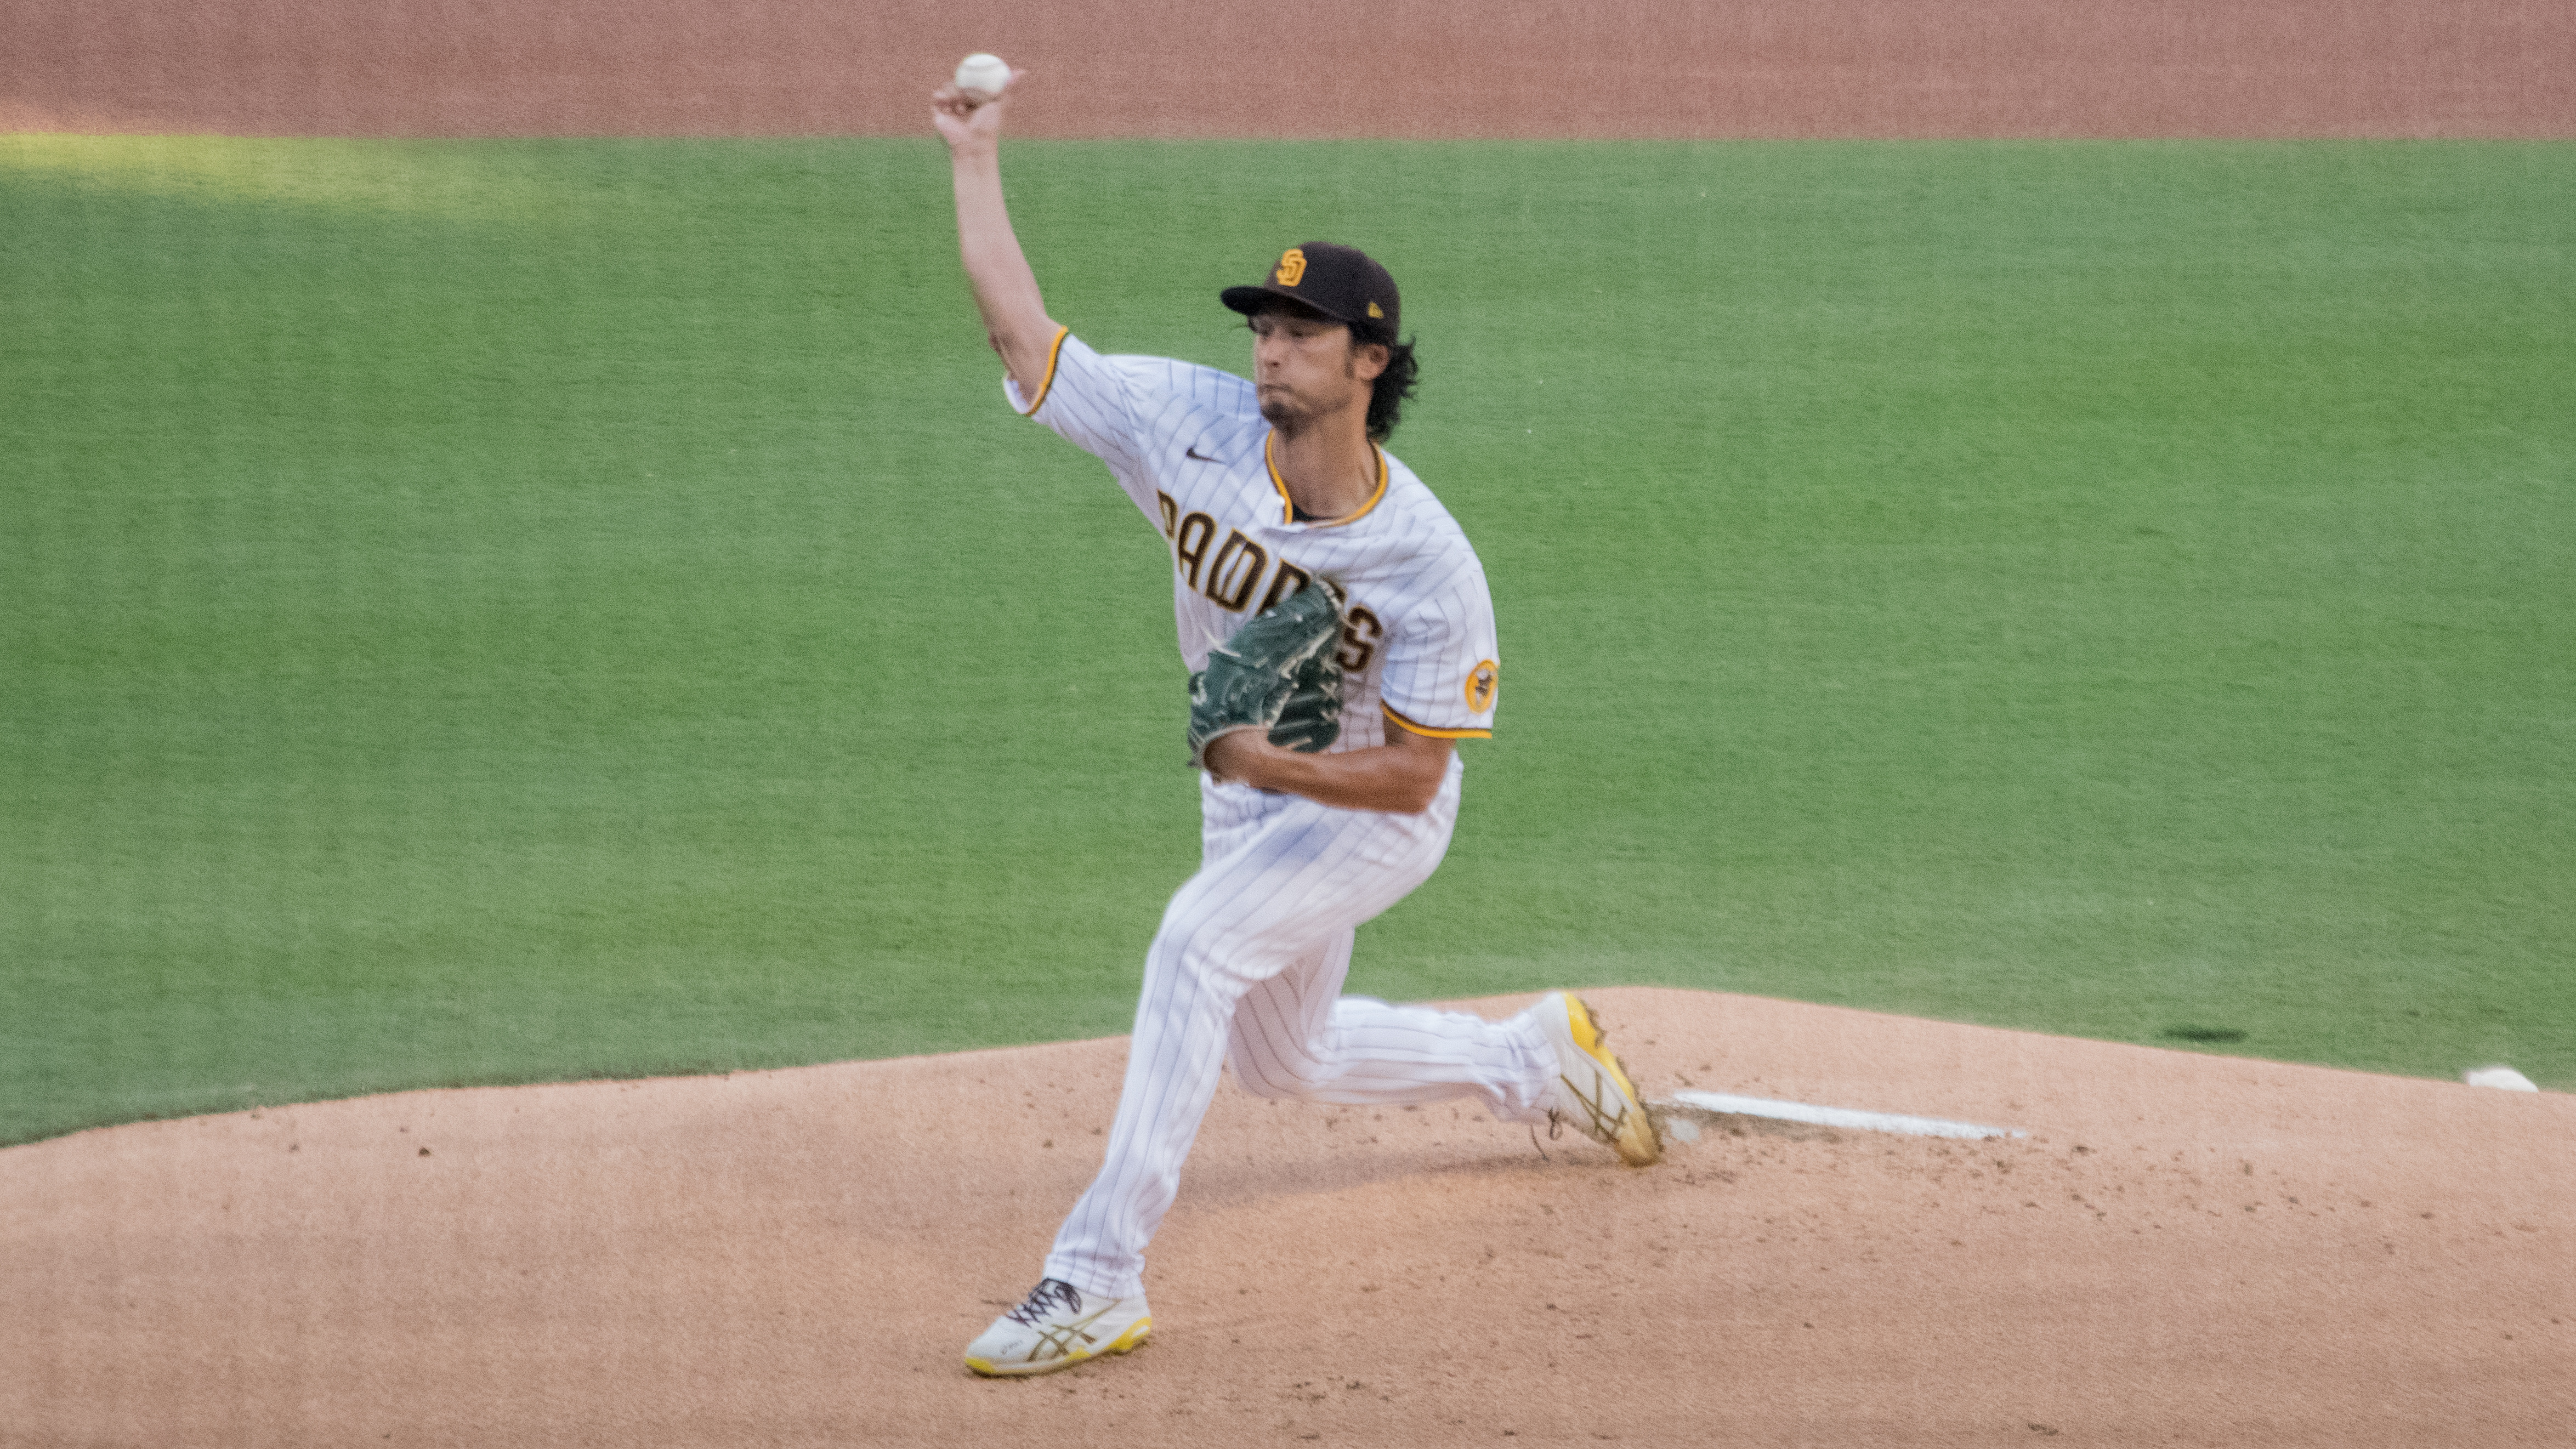 Yu Darvish throws a pitch in the first inning of Thursday